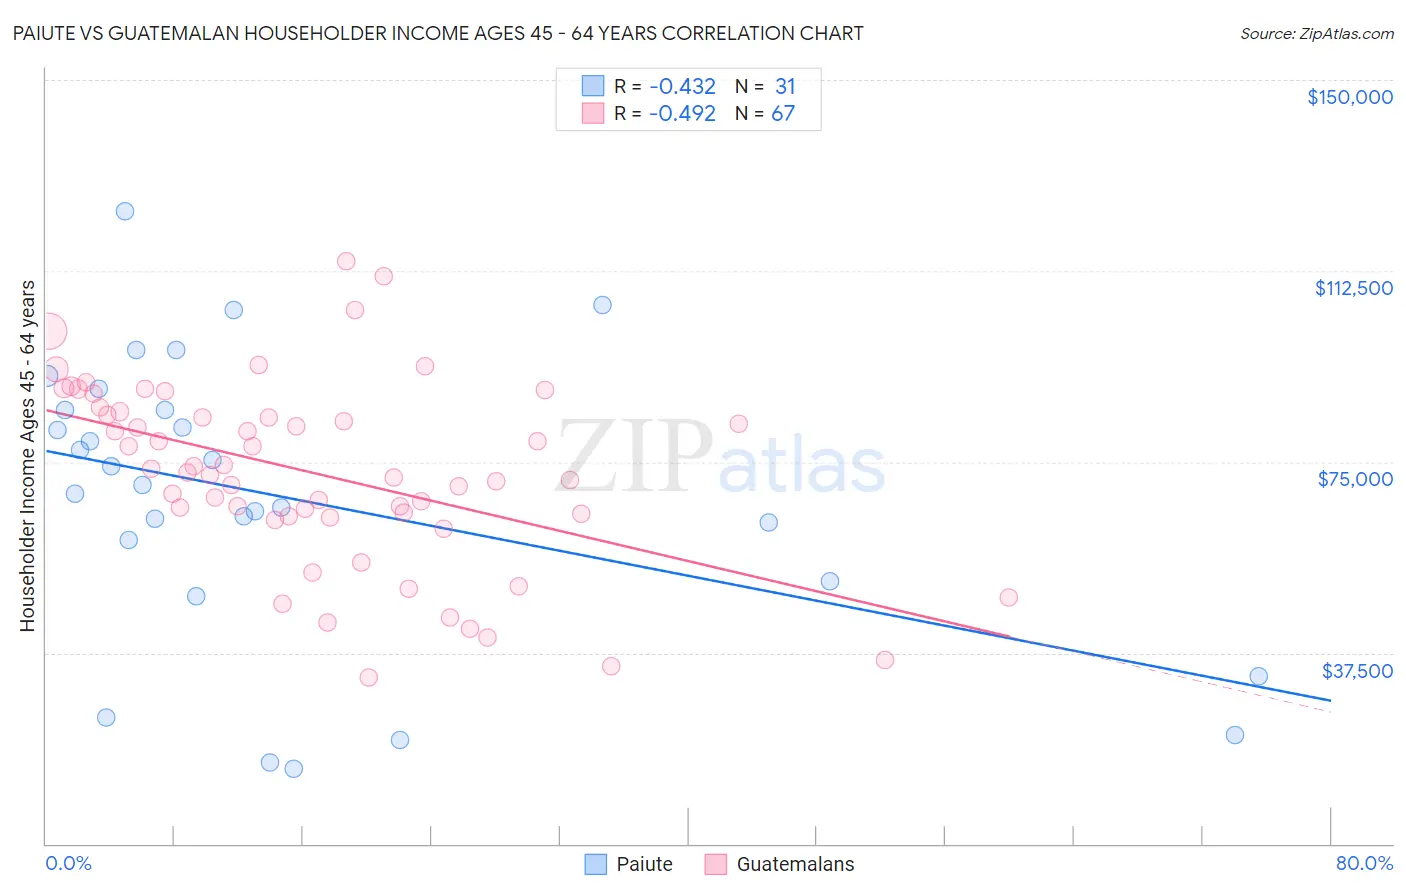 Paiute vs Guatemalan Householder Income Ages 45 - 64 years